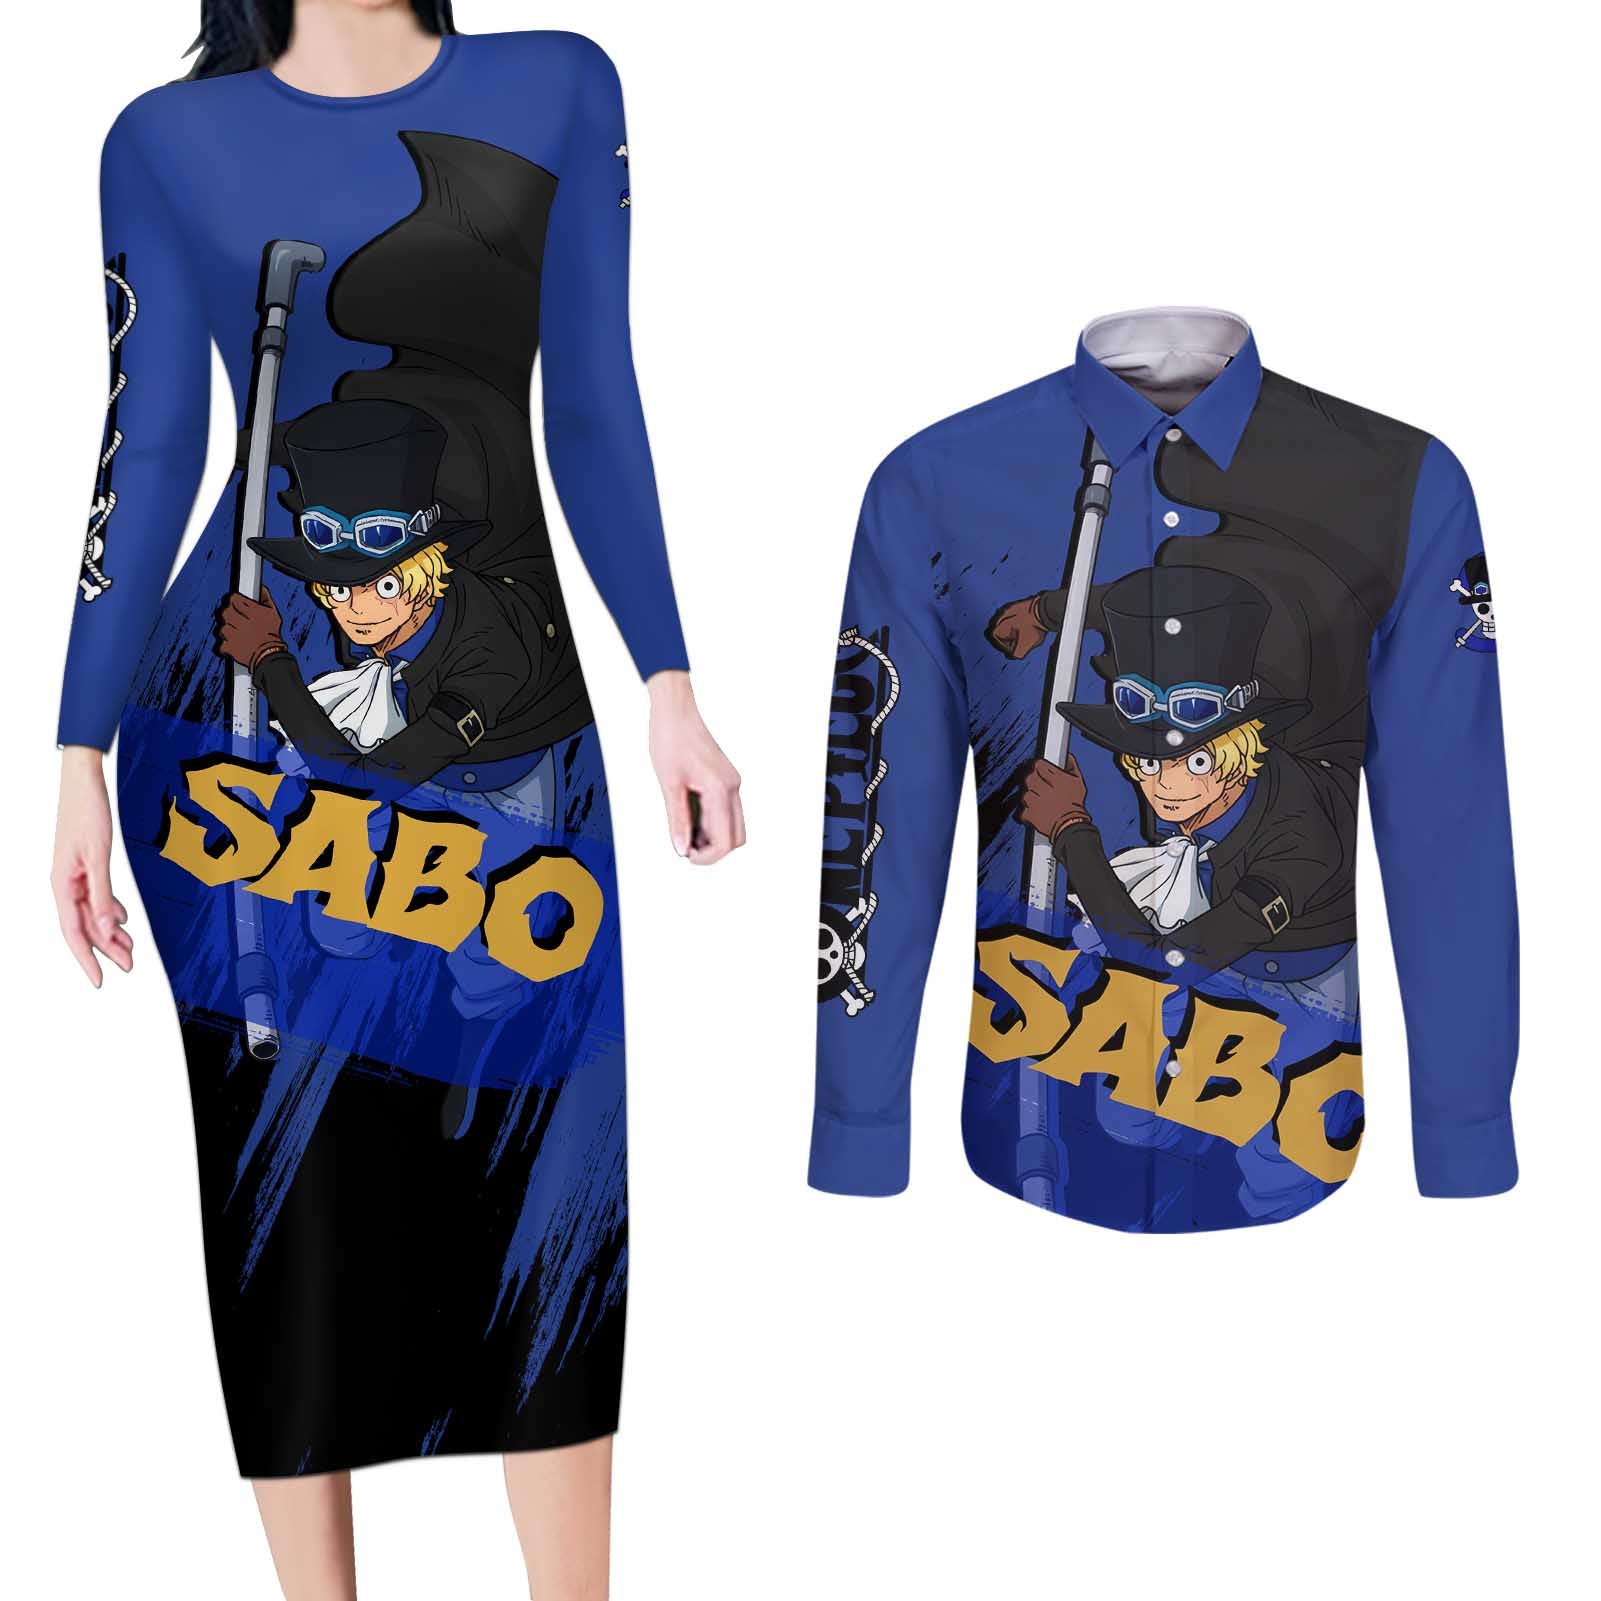 Sabo - One Piece Couples Matching Long Sleeve Bodycon Dress and Long Sleeve Button Shirt Anime Style